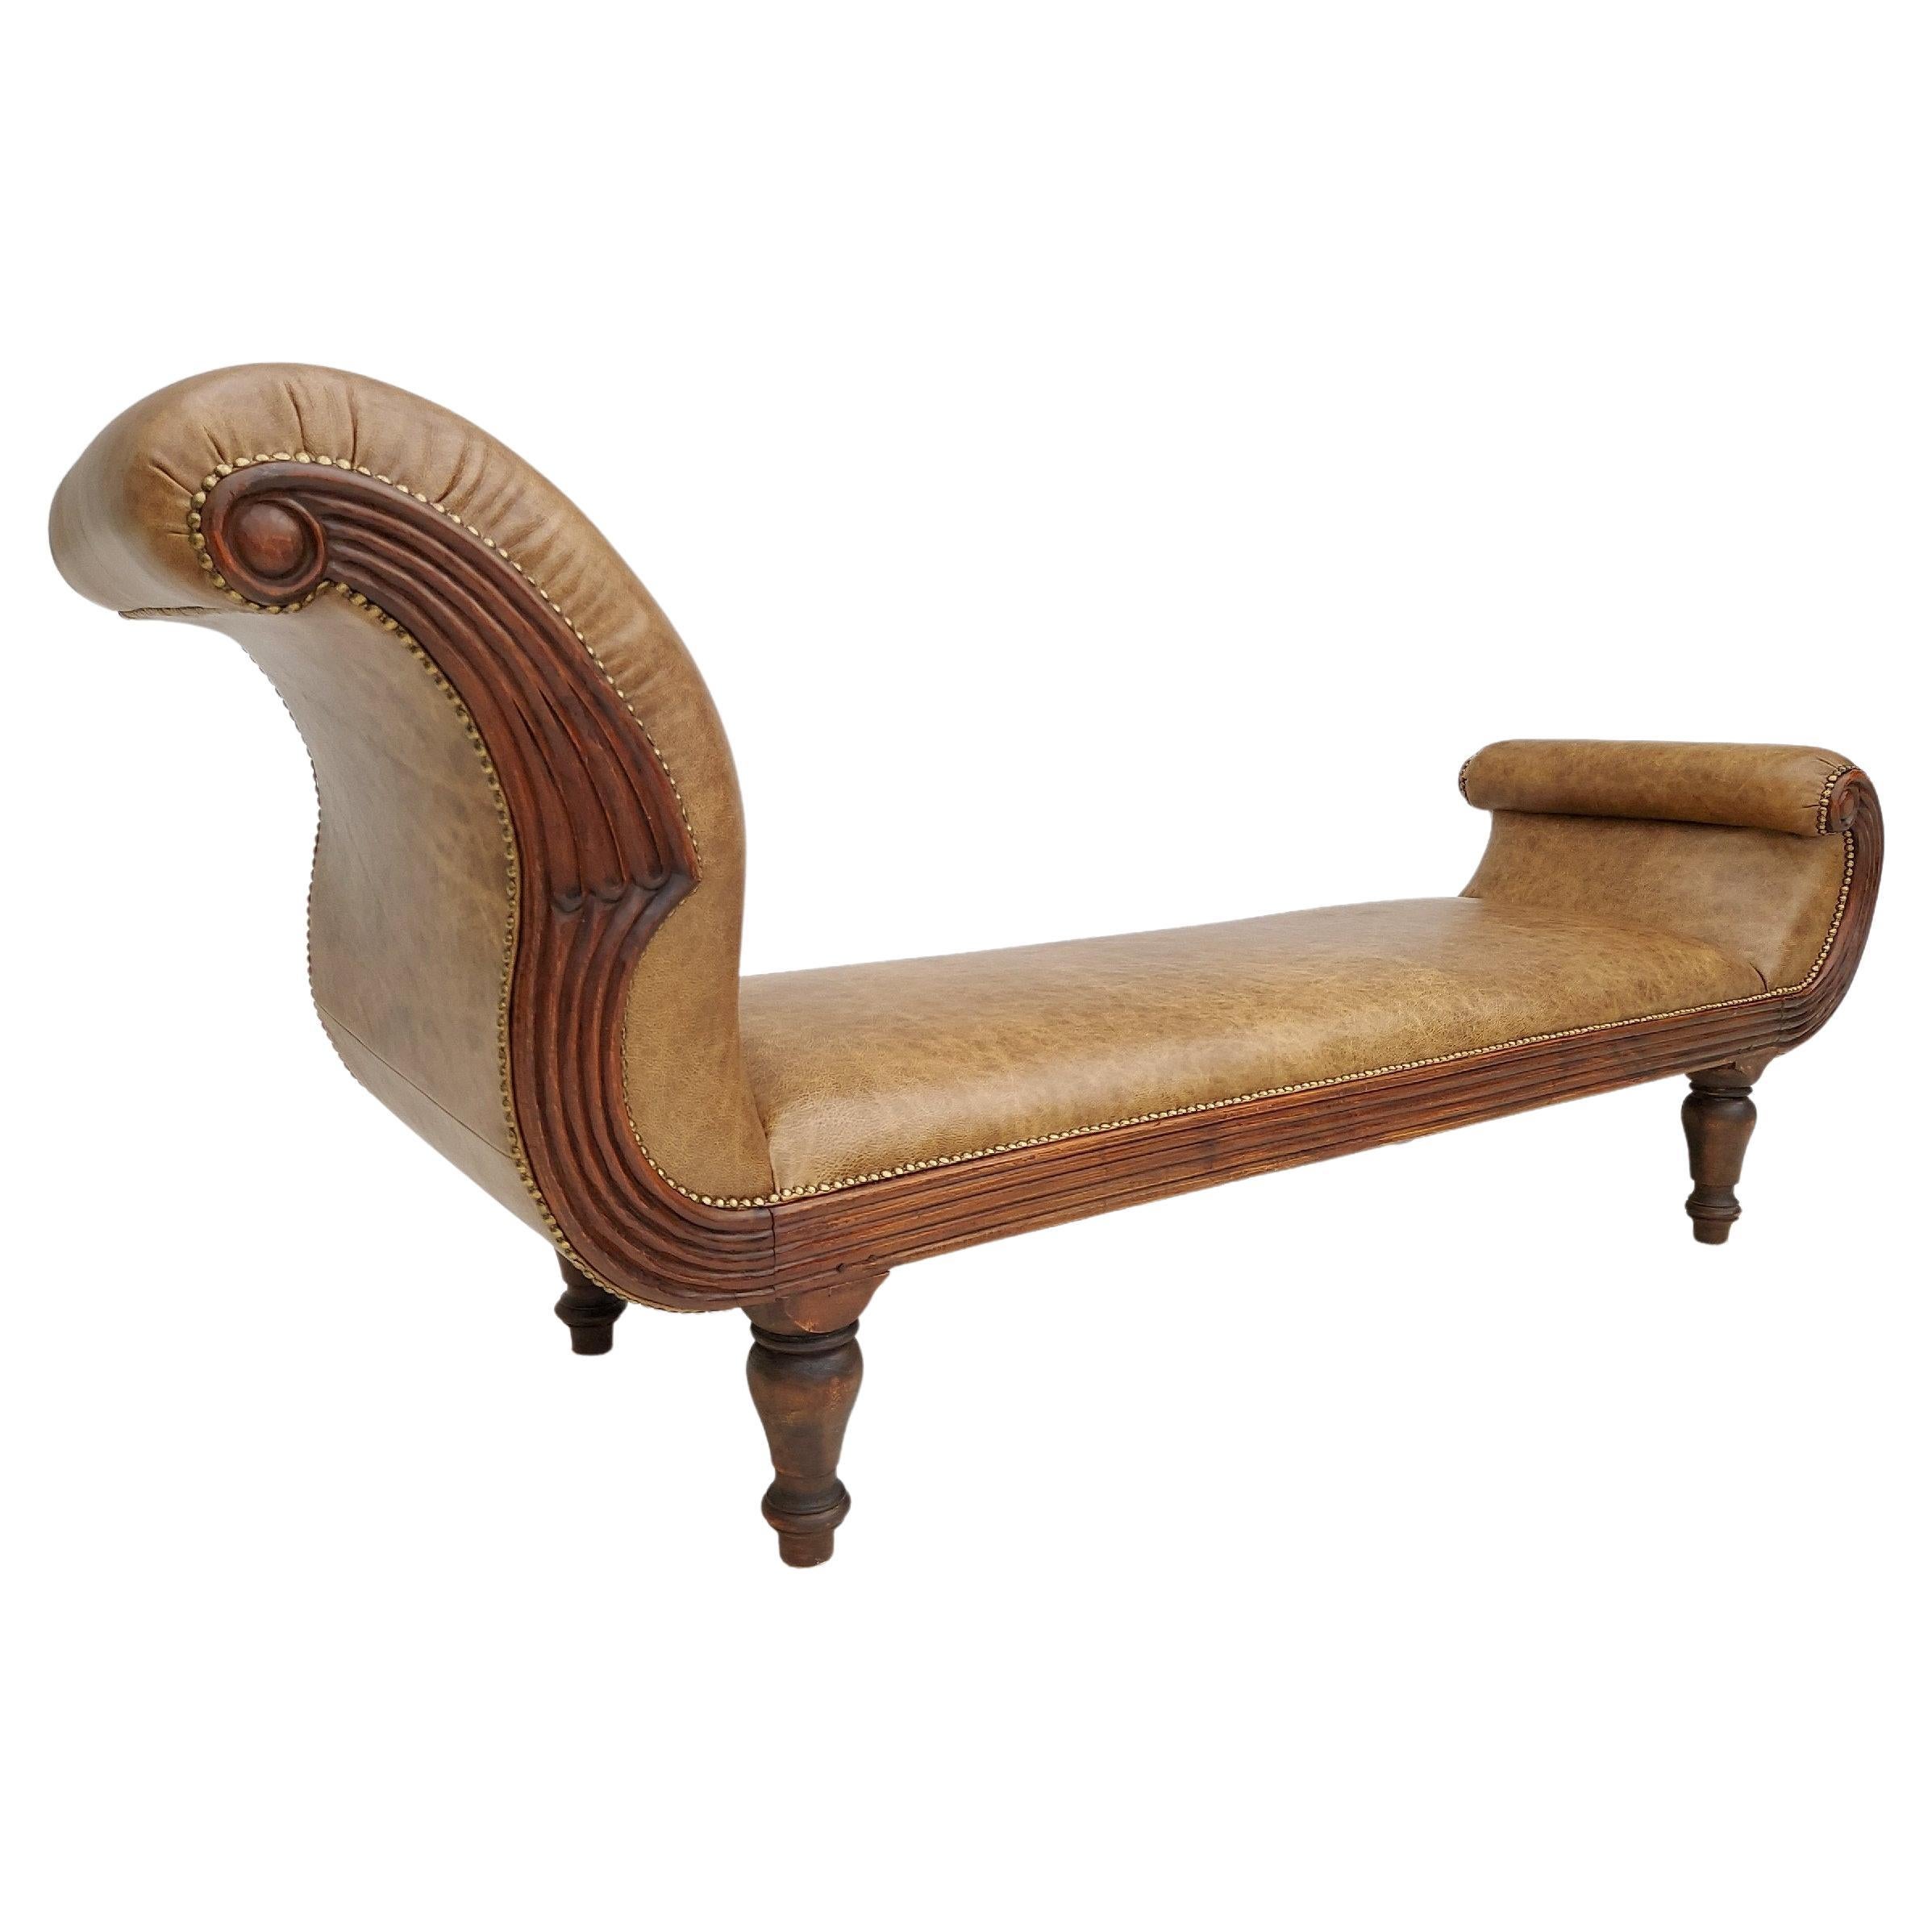 Danish Antique Chaise Longue / Daybed, Early 20th Century, Renovated For Sale